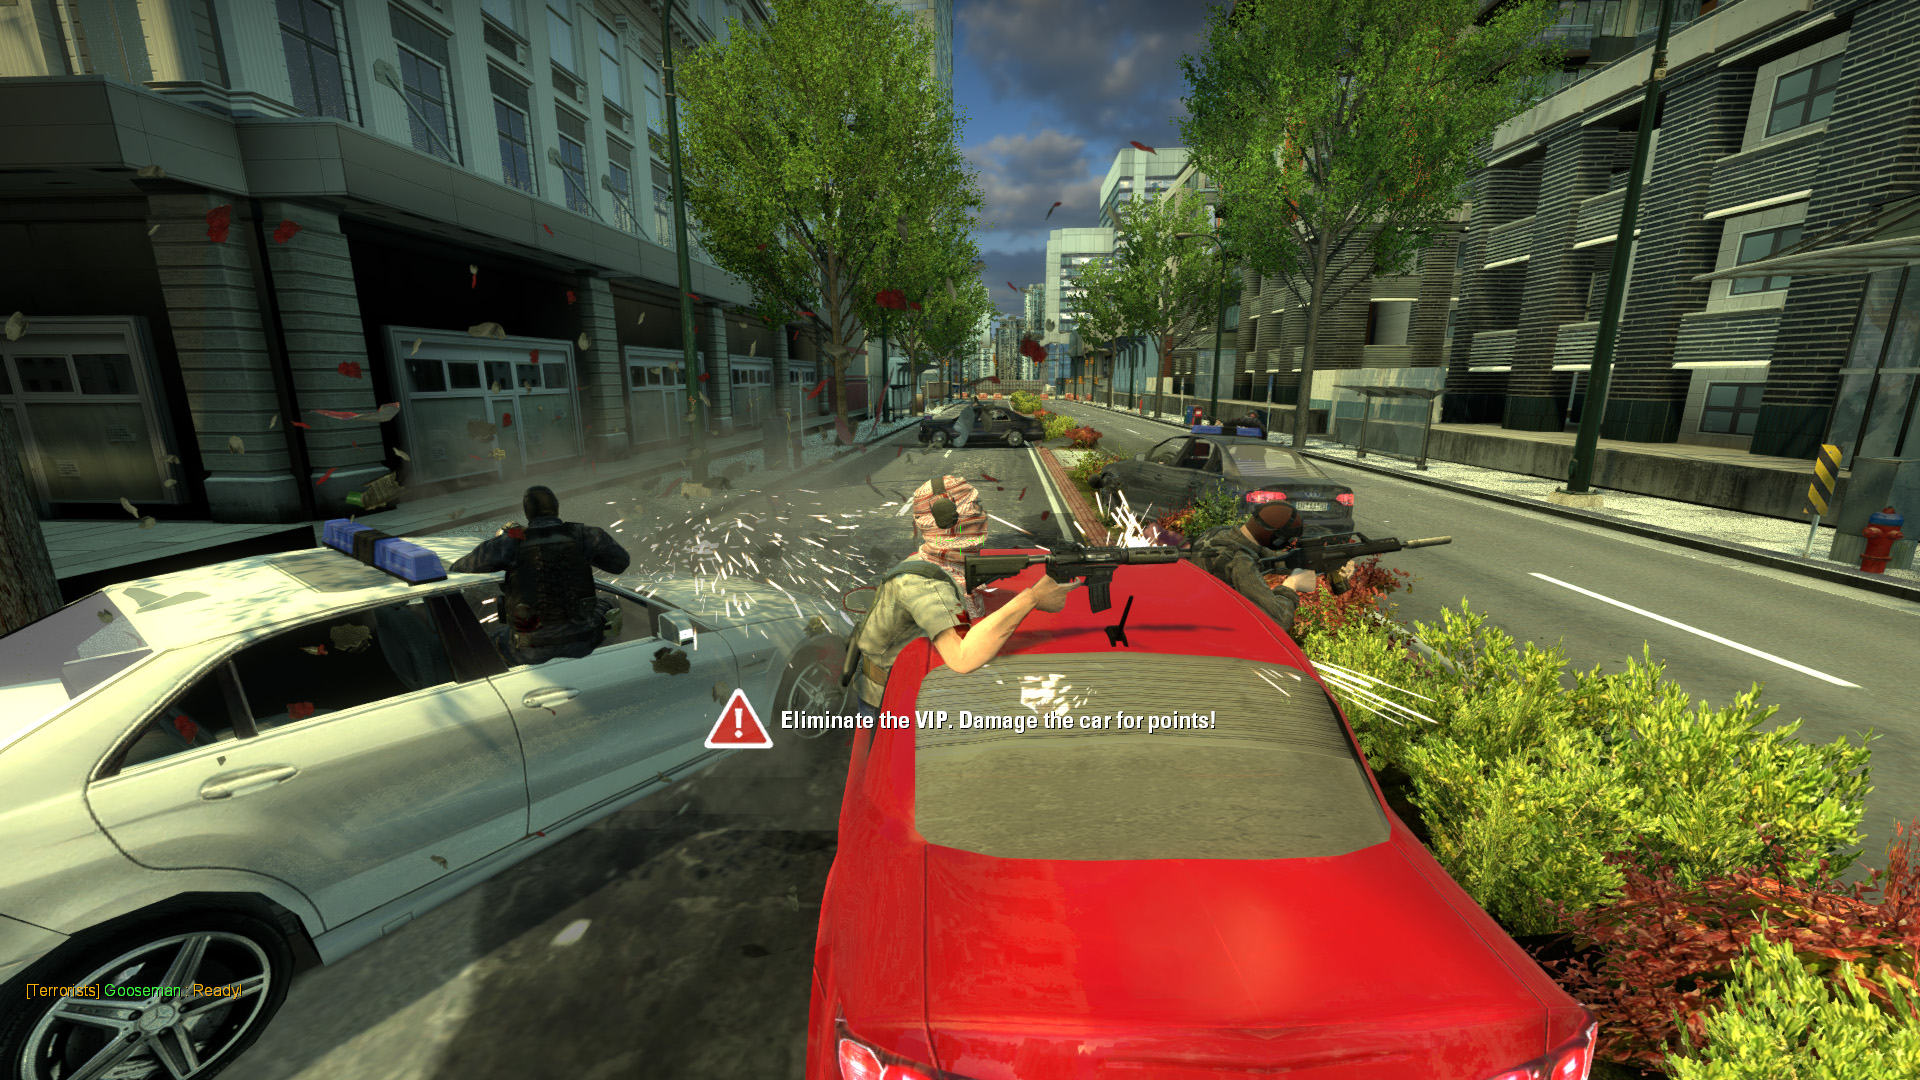 tactical intervention download